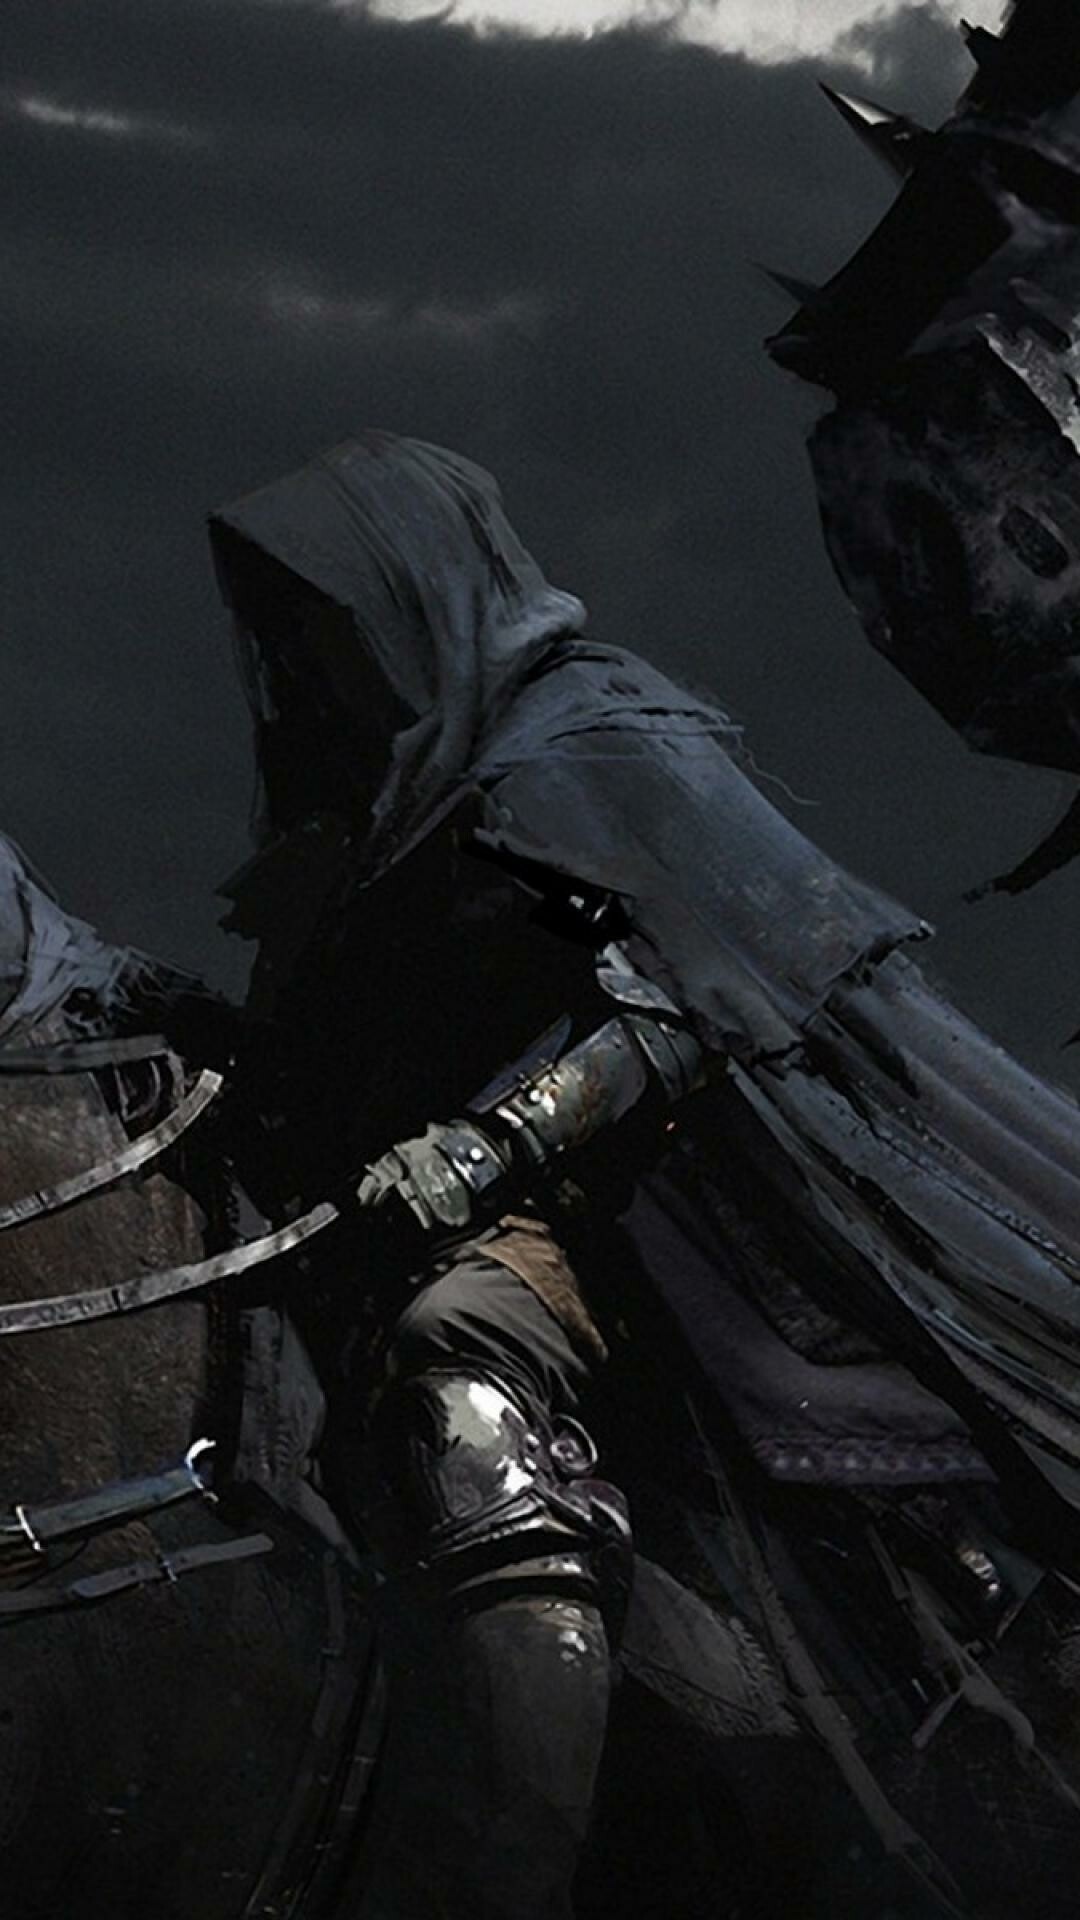 The Lord of the Rings: Nazgul, Sauron's “most terrible servants”. 1080x1920 Full HD Background.